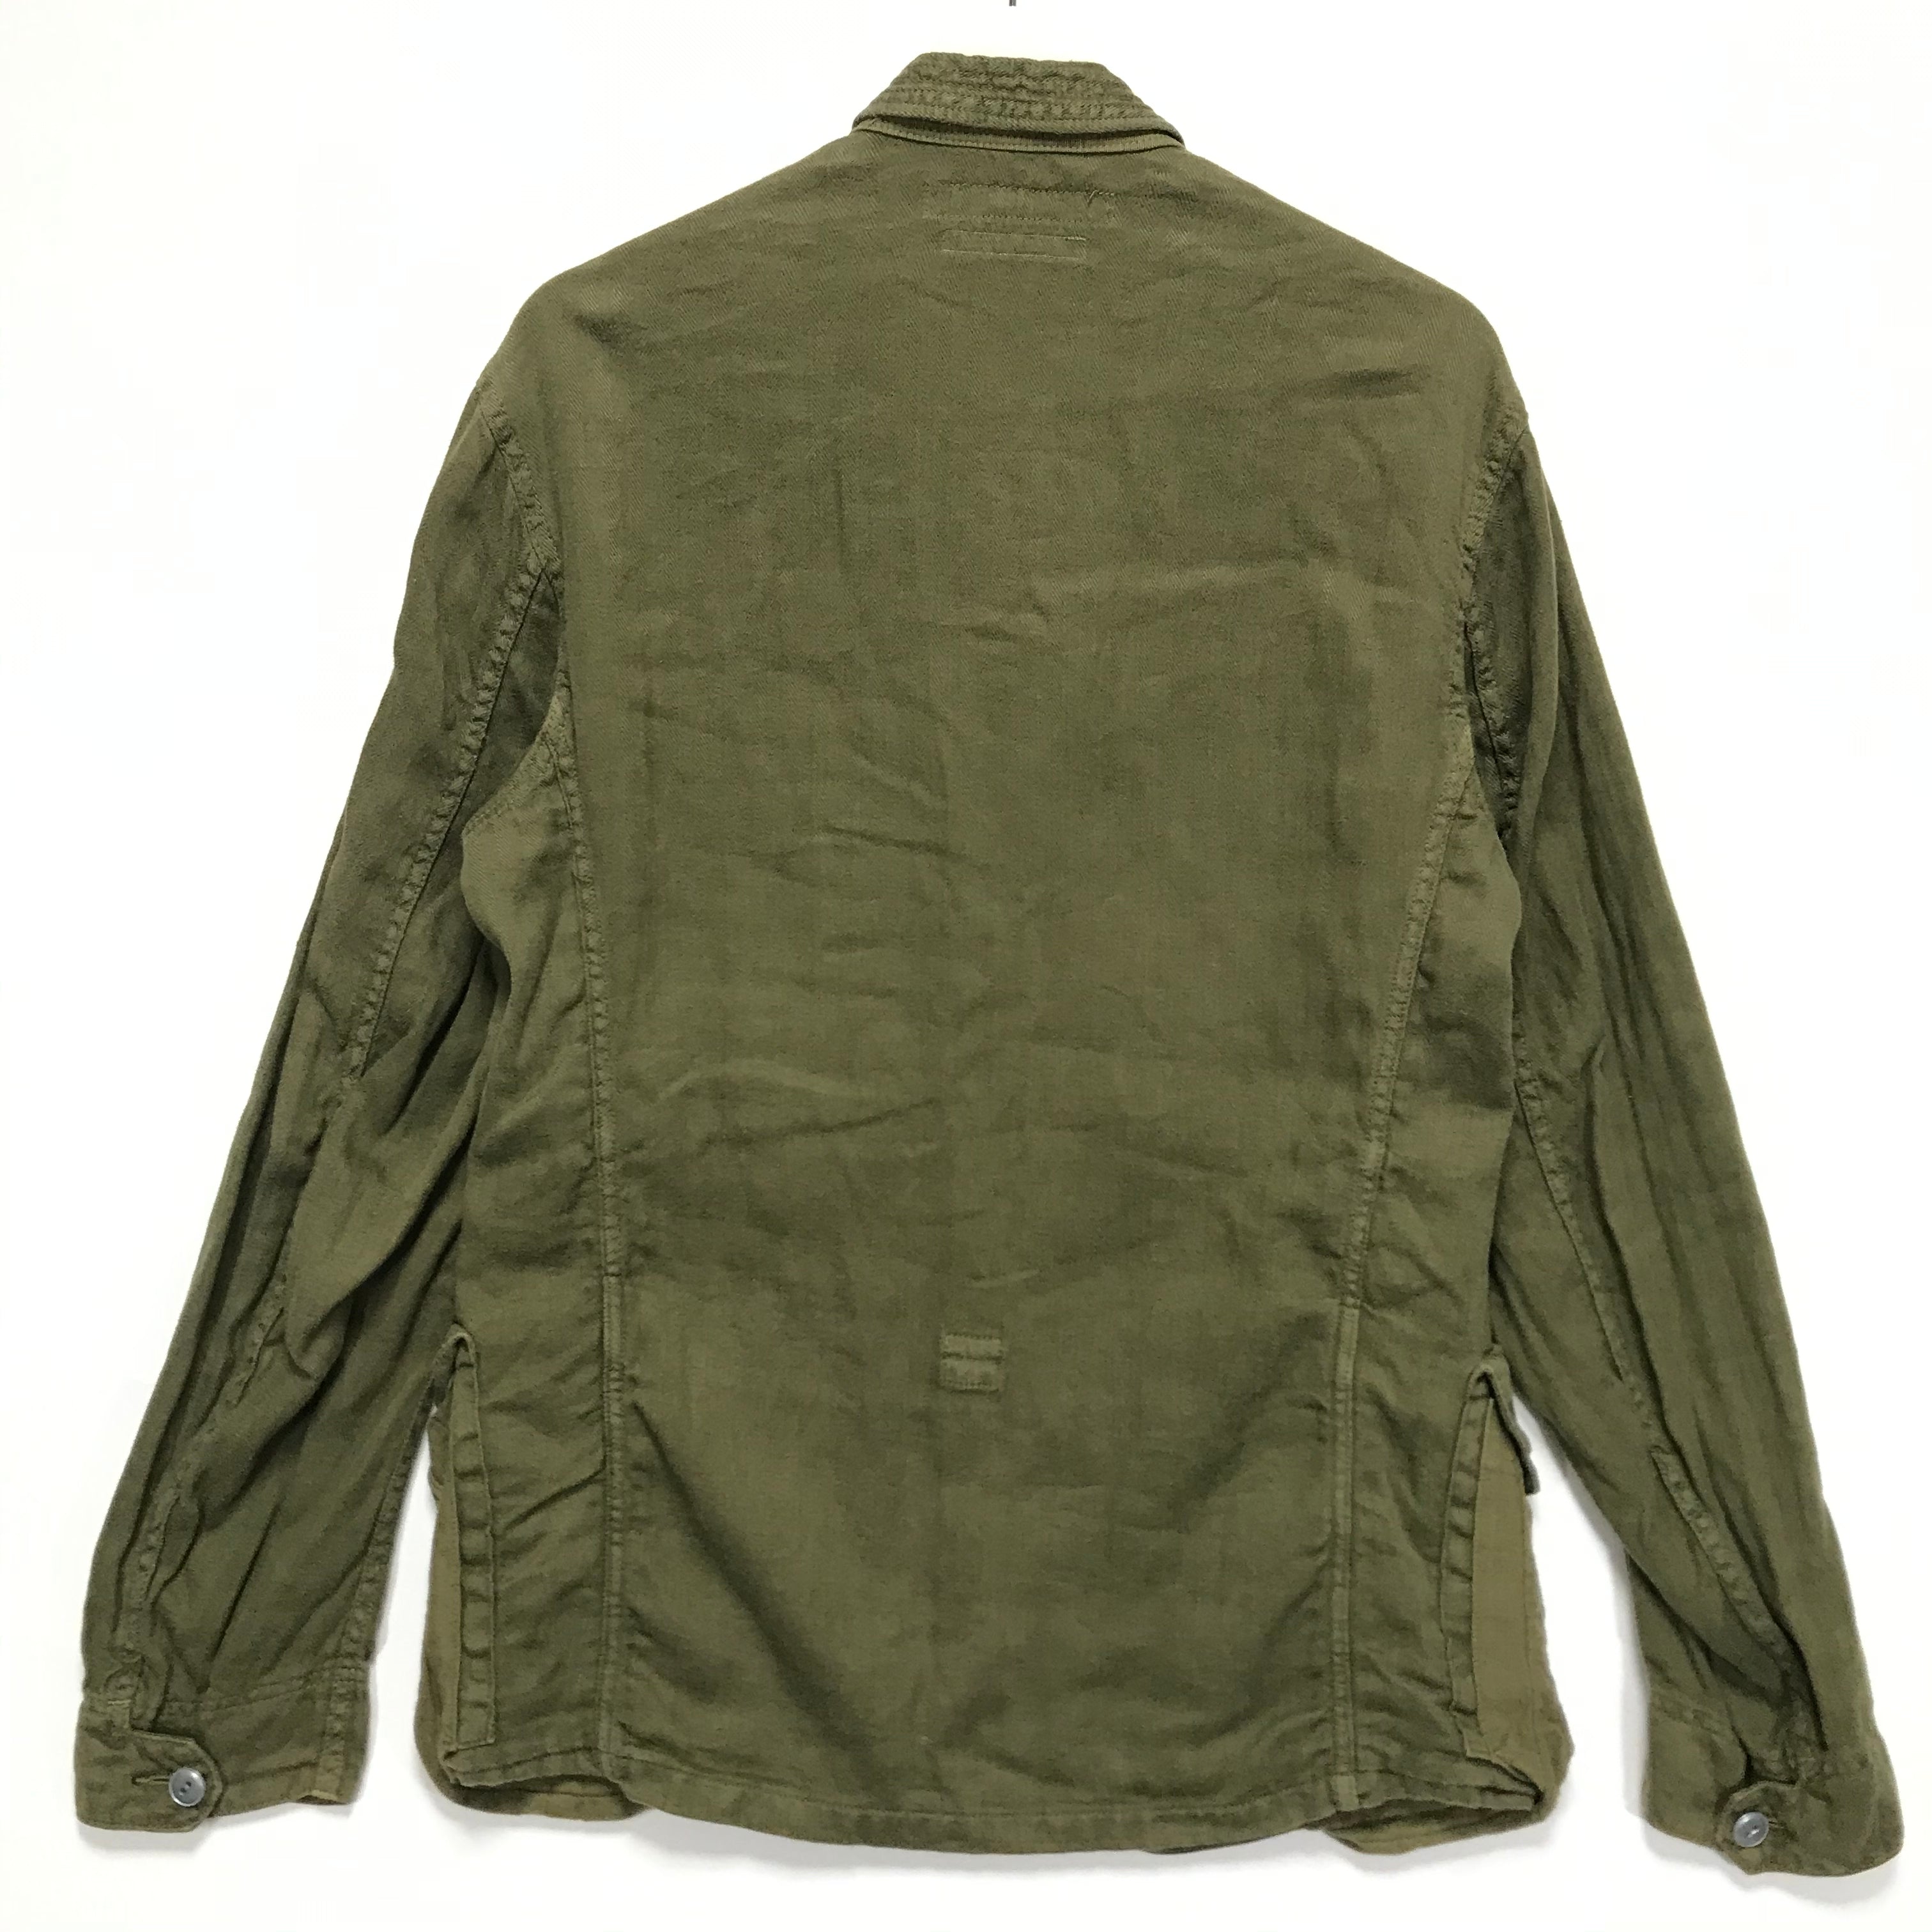 Olive & Oak Sweater Sleeve Cotton Military Jacket in Olive